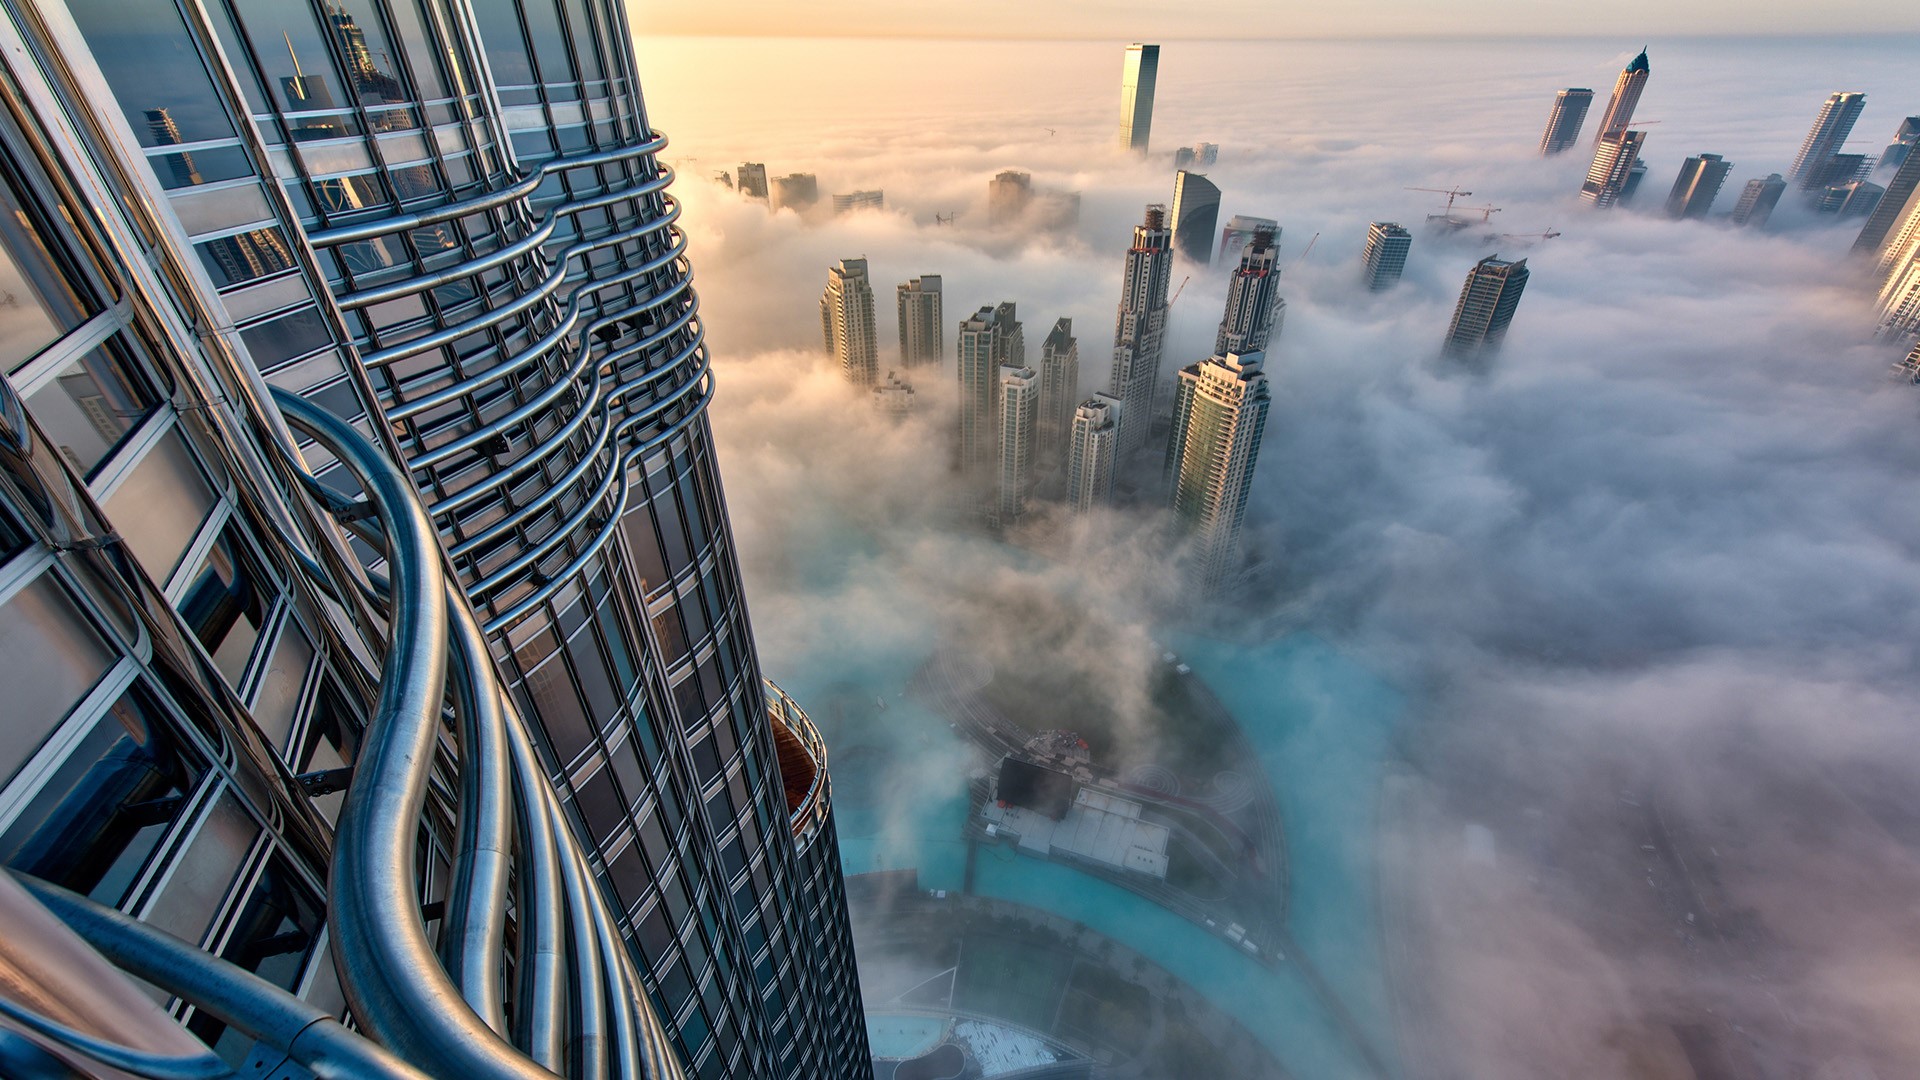 Aerial view of cityscape with skyscrapers above the clouds in Dubai, UAE | Windows 10 Spotlight